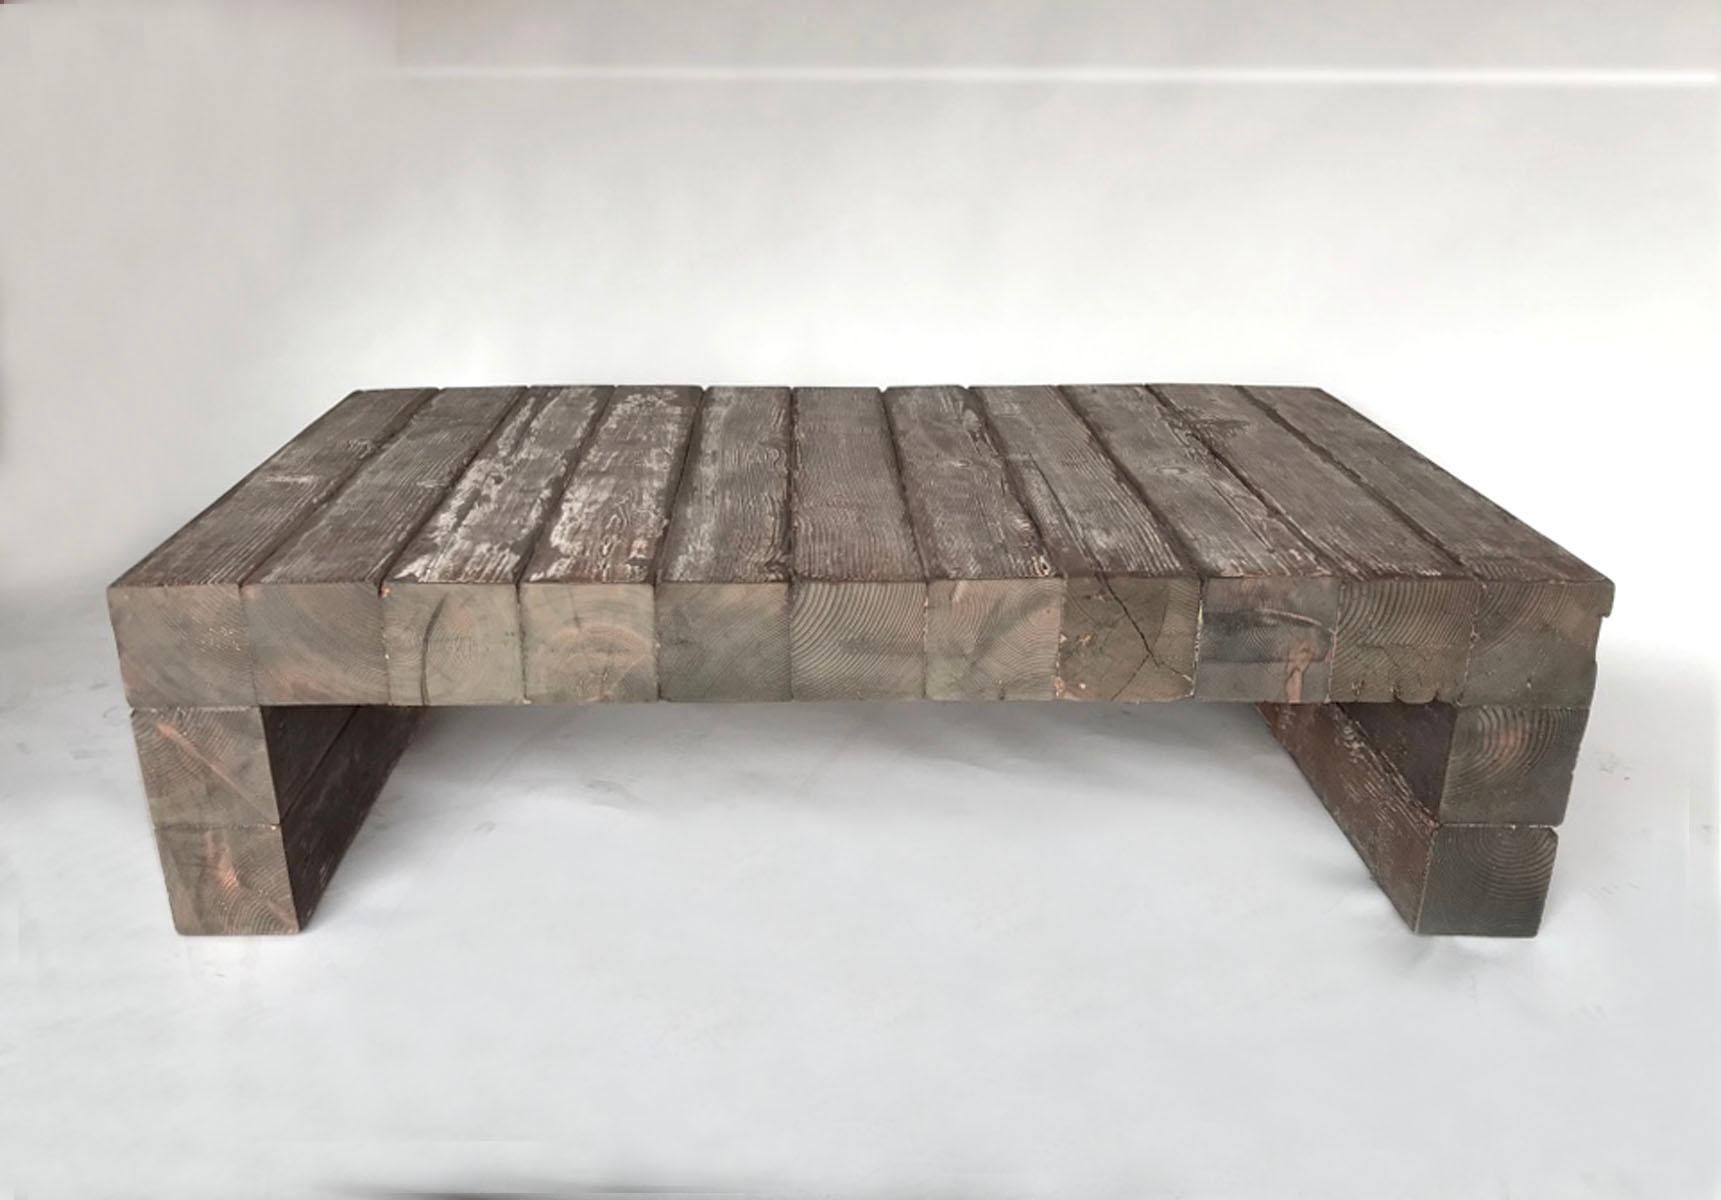 Here is a coffee table perfect for your cabin or rustic living room! It can even go outside. It is made from vintage reclaimed Douglas fir. Very masculine, rustic modern. Some remnants of white paint.